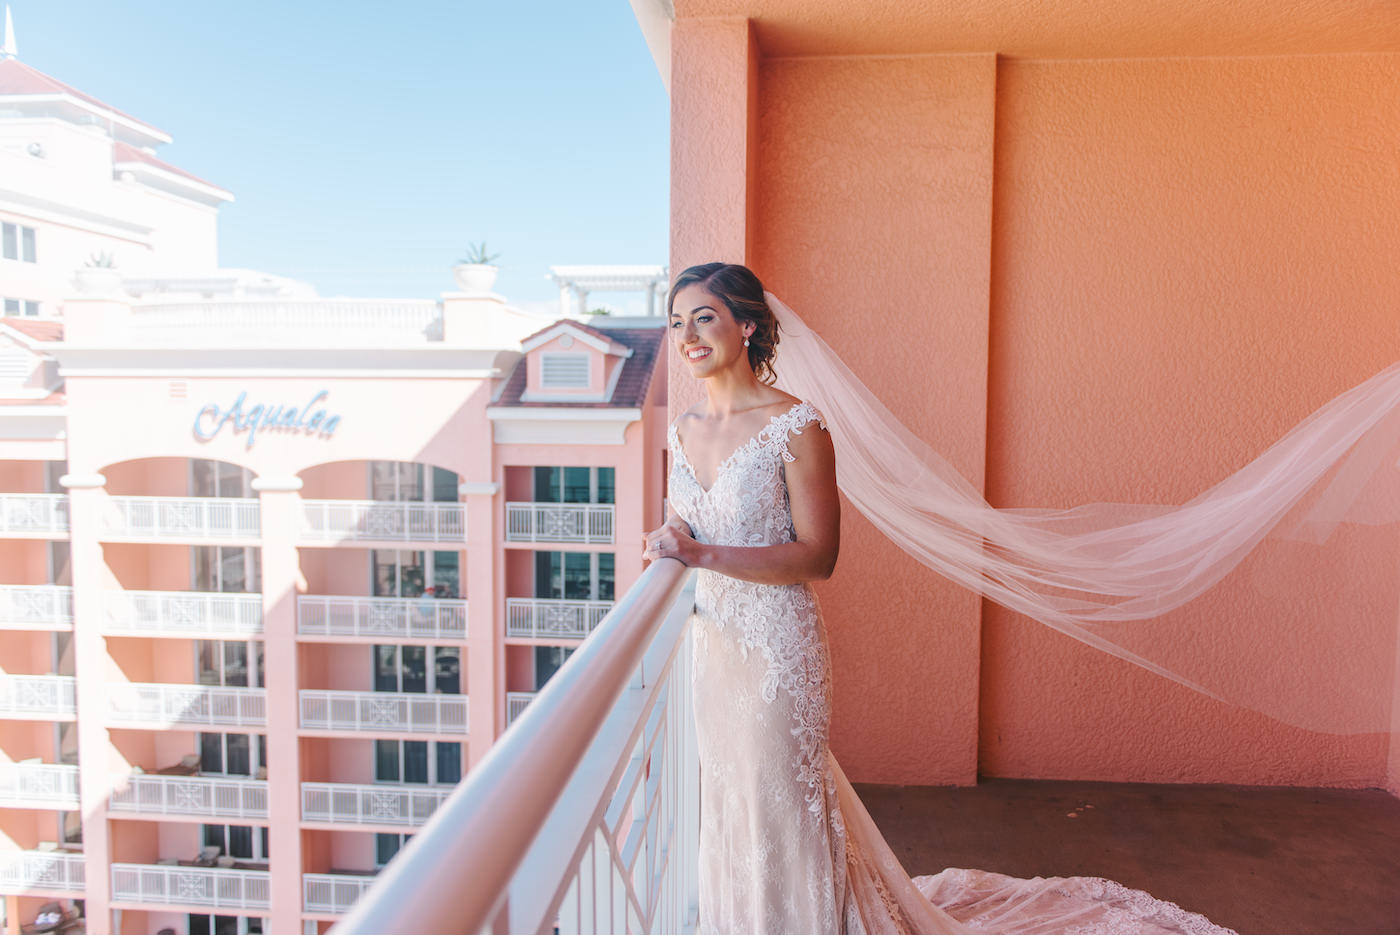 Clearwater Beach Wedding Venue The Hyatt Regency Clearwater Beach | Ivory and Champagne Lilian West Sheath Wedding Dress Bridal Gown with V Neck Off The Shoulder Straps, Scalloped Edge Train and Long Cathedral Veil | Tampa Bay Wedding Photographer Kera Photography